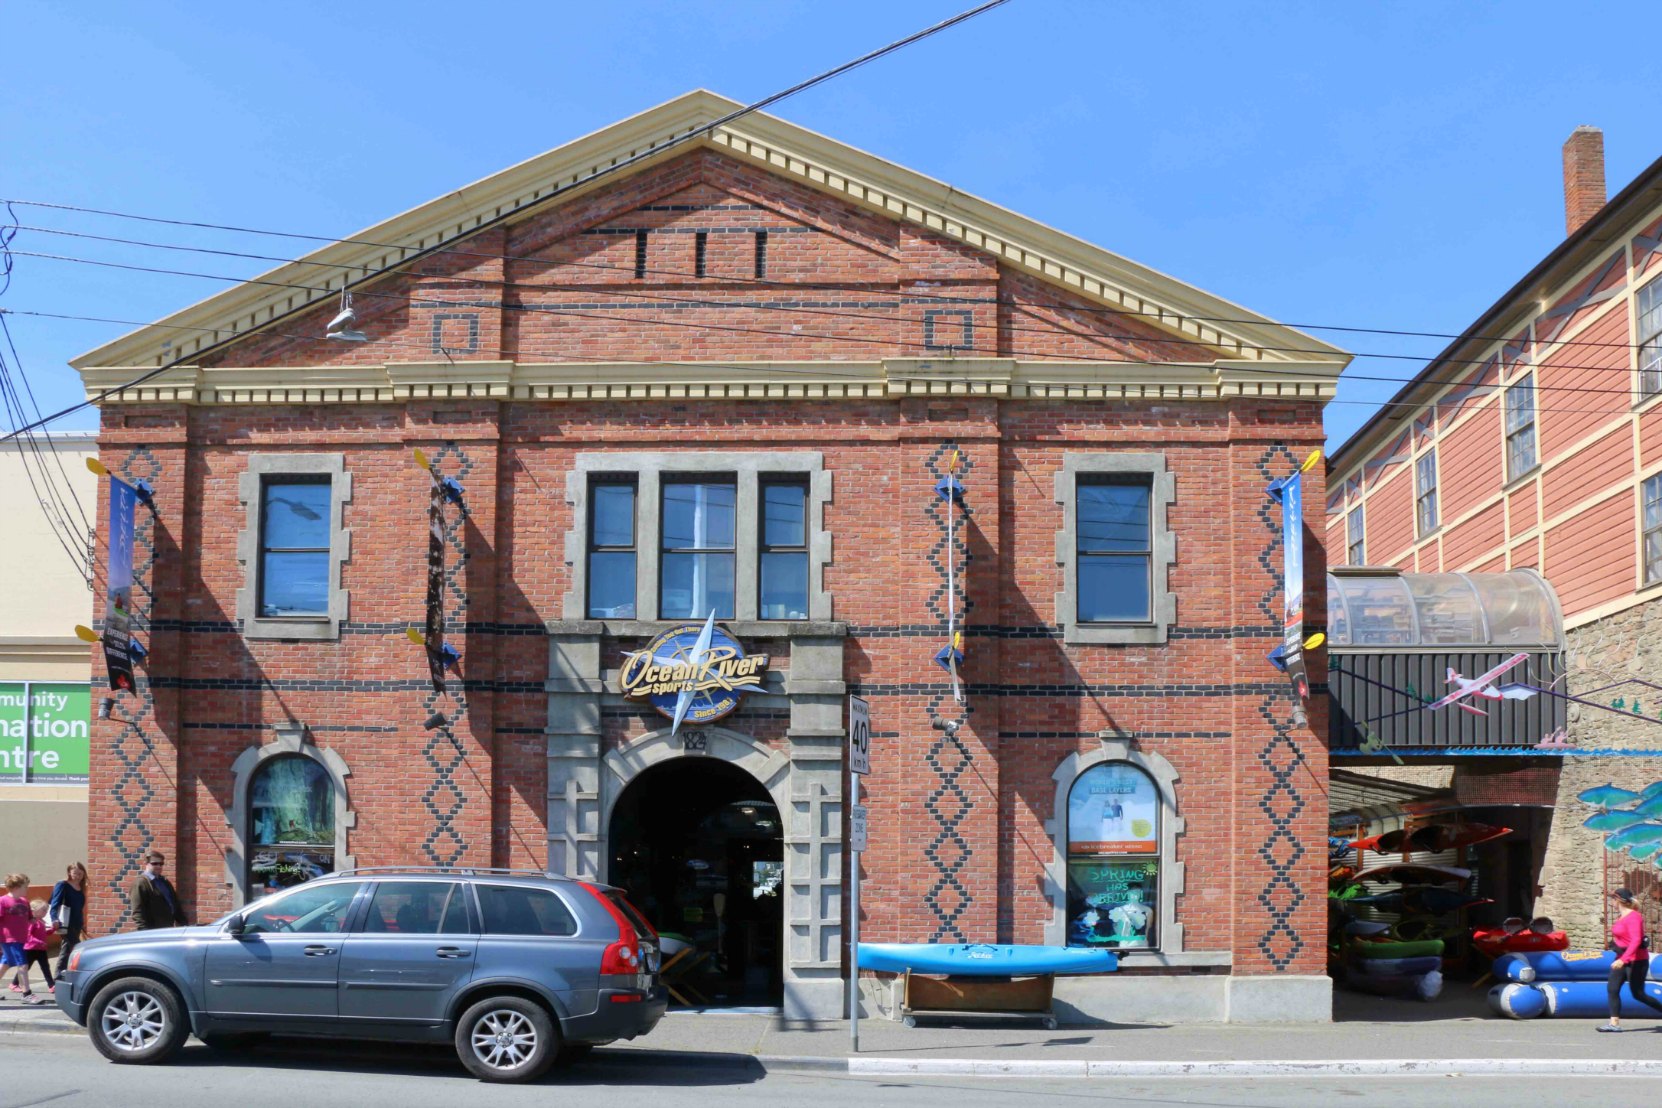 Ocean River Sports, 1824 Store Street. This building was originally built in 1890 for the Victoria Rice and Flouring Mill. (photo by Victoria Online Sightseeing Tours)